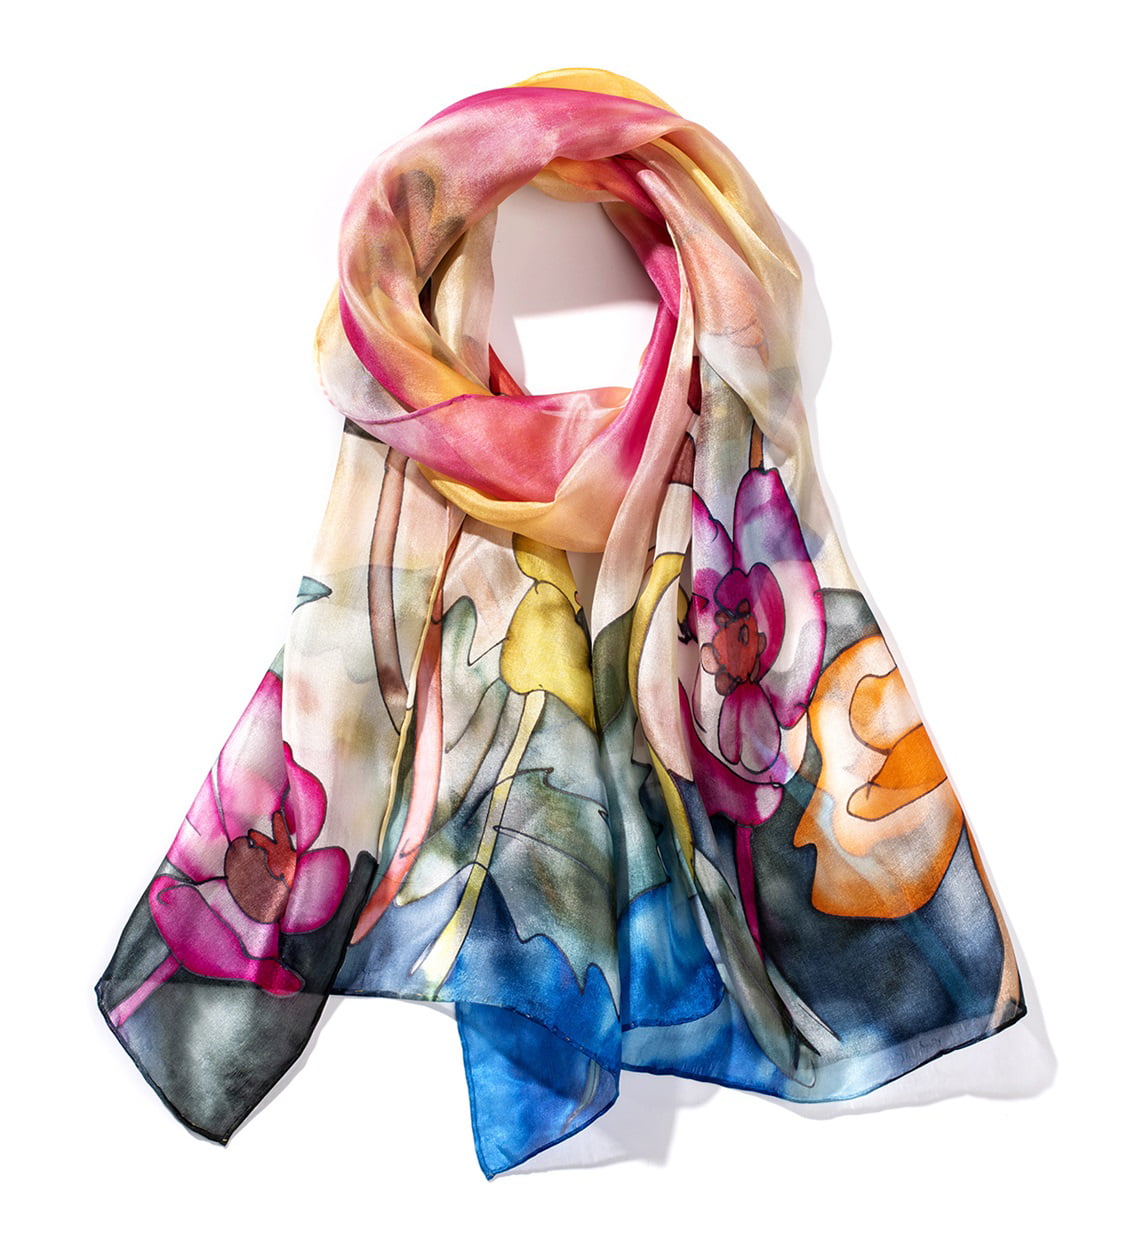 Multi-Color Silk Scarf Abstract Design 100% Silk Discounted 2nds Handpainted 